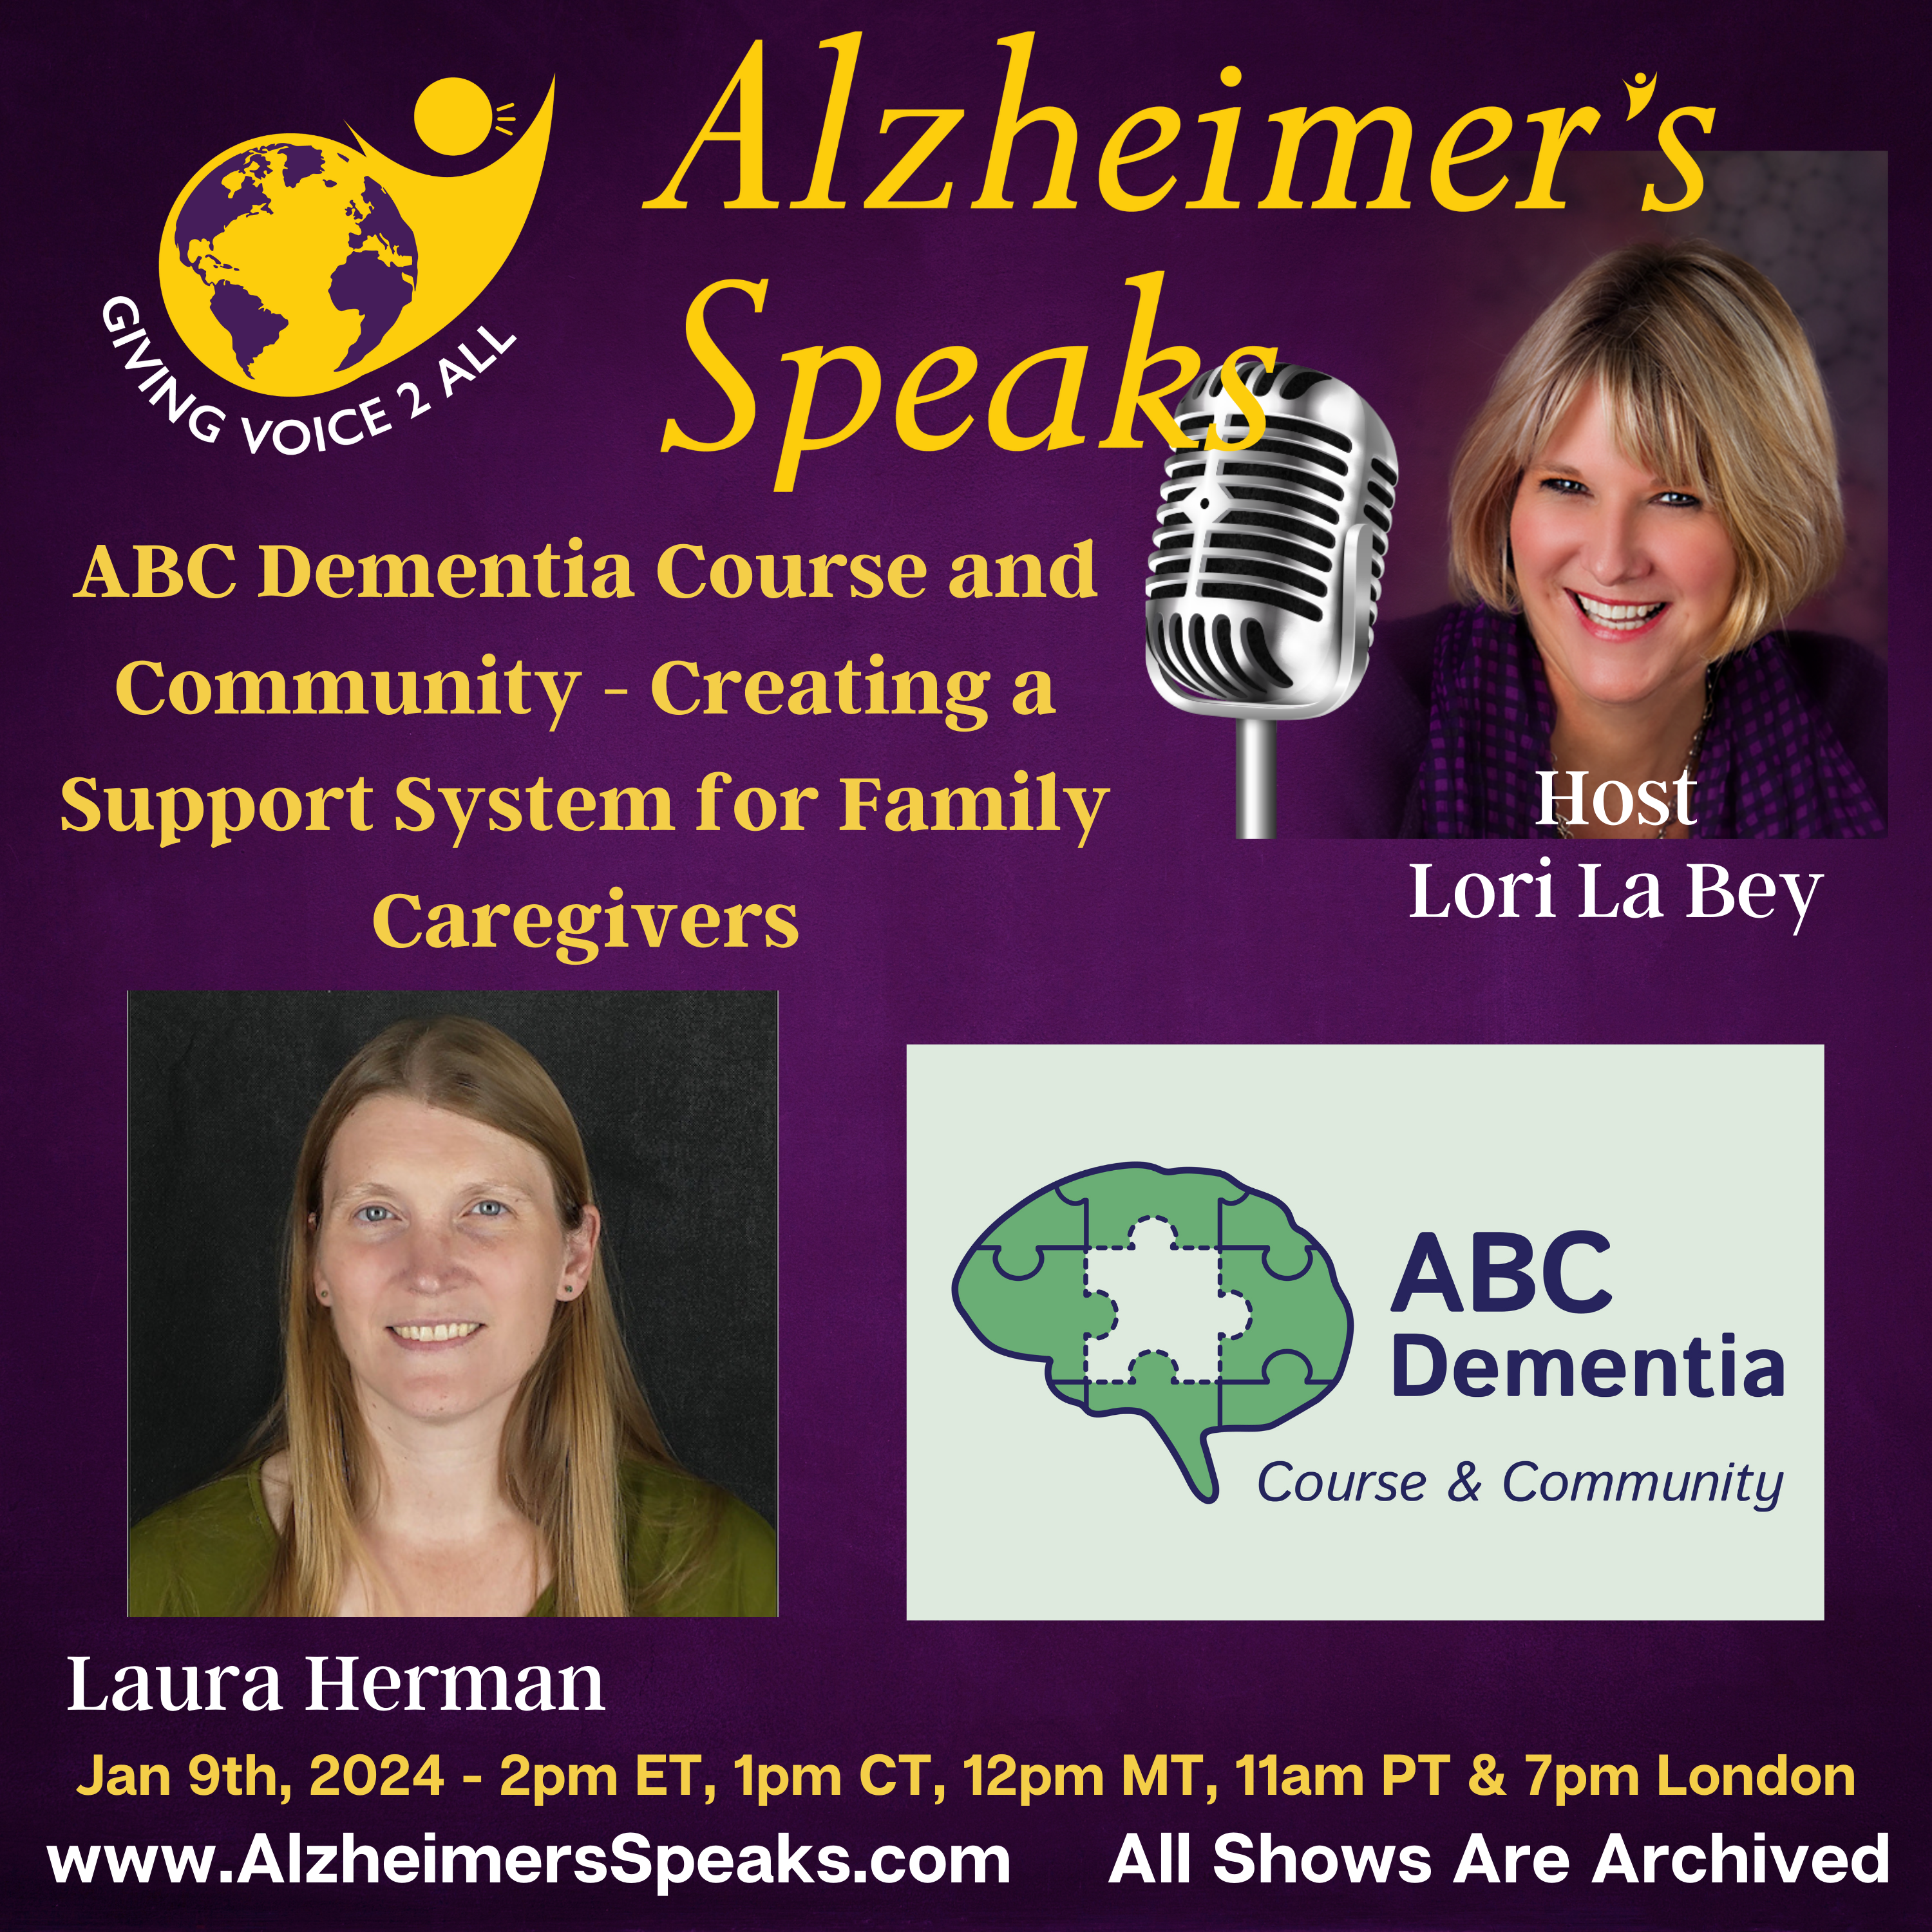 ABC Dementia Course and Community - Creating a Support System for Family Caregivers